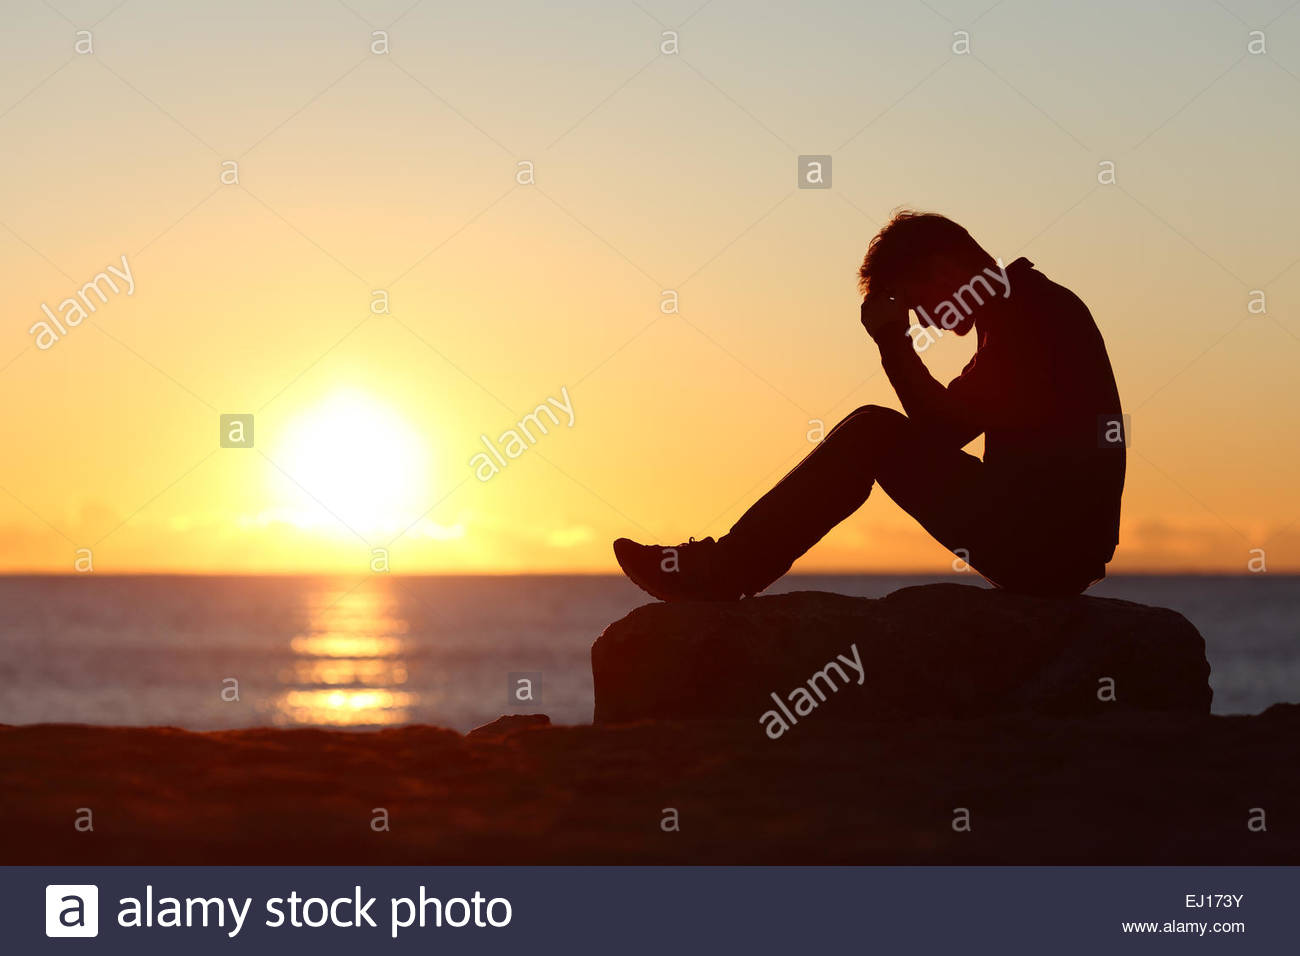 Sad Man Silhouette Worried On The Beach At Sunset With Sun In